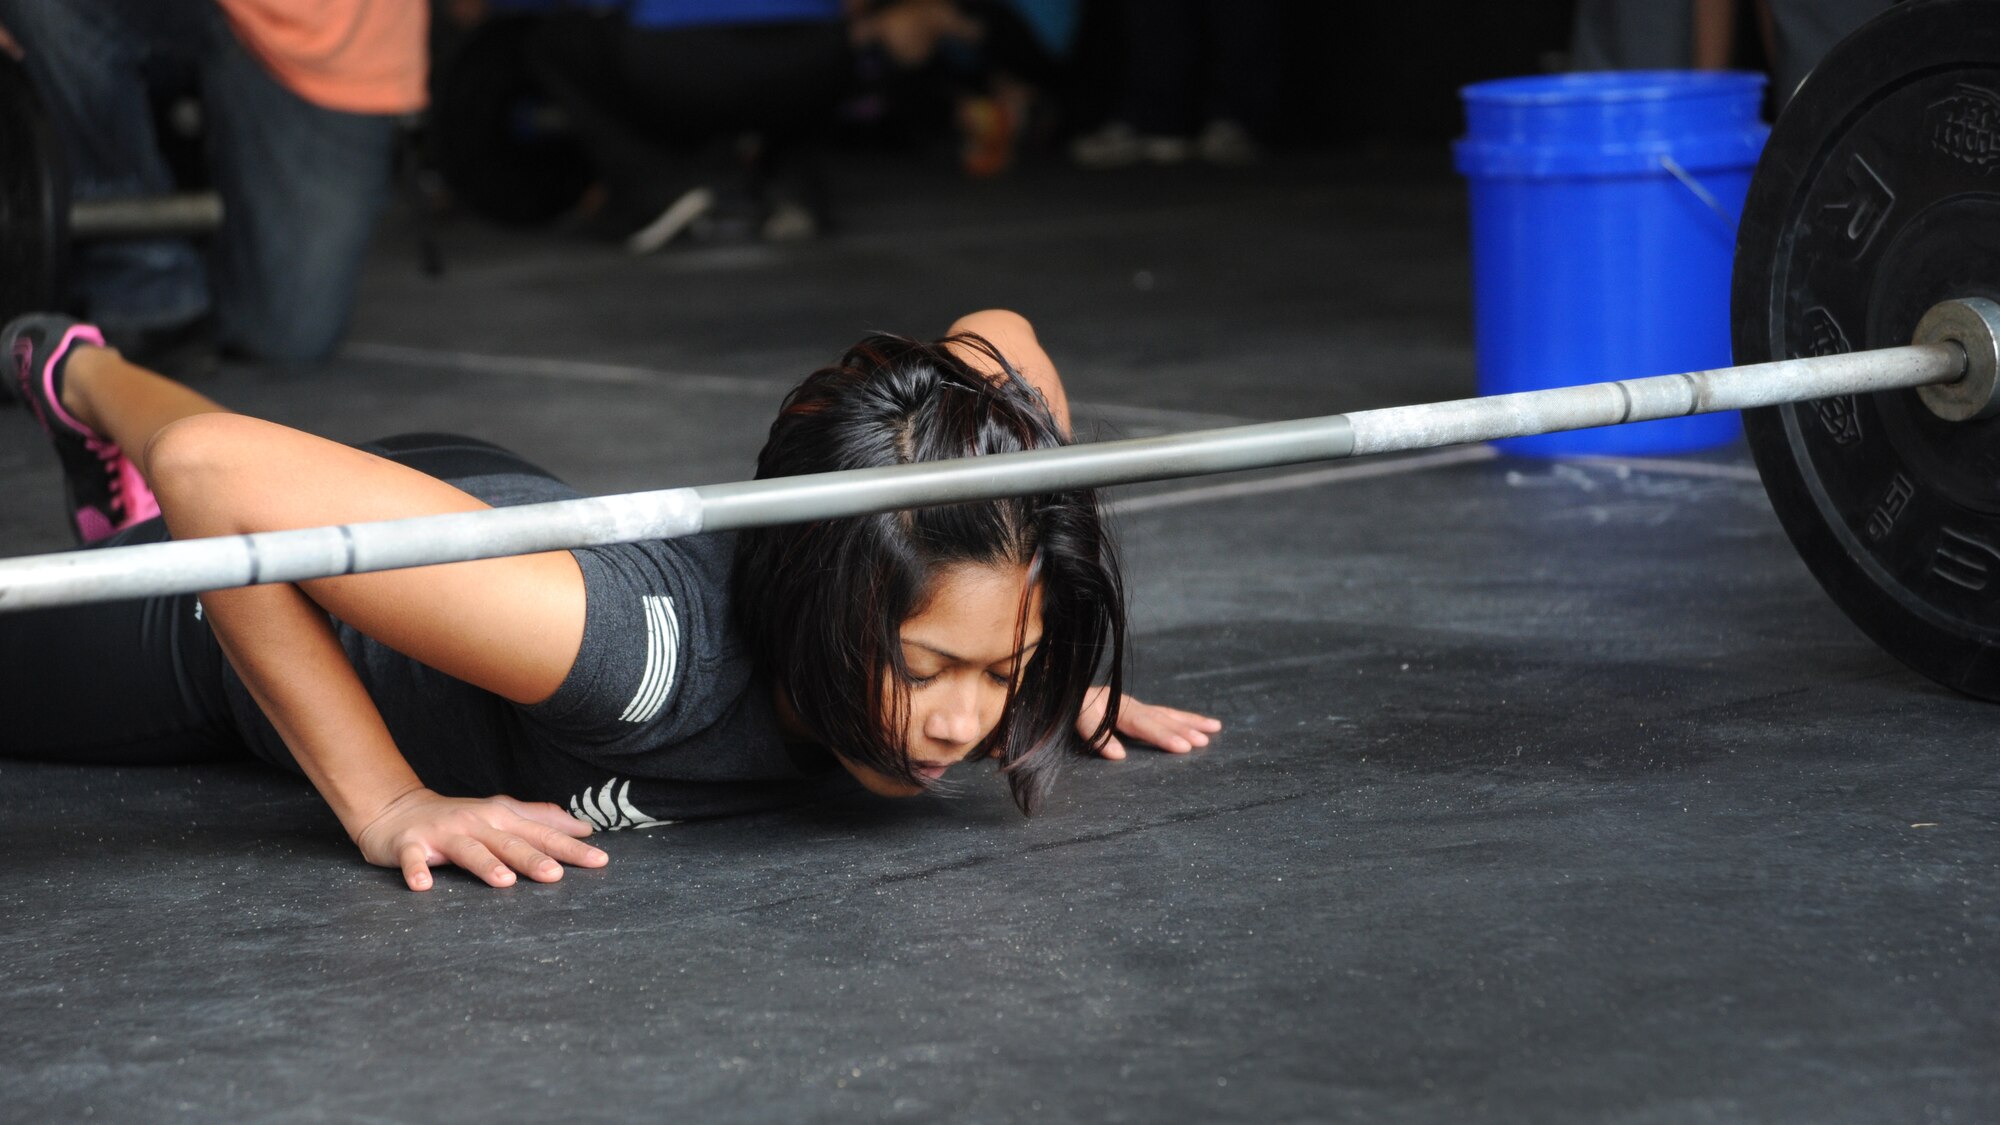 Senior Airman Nikki Mitchell, 436th Dental Squadron dental assistant, performs a burpee during the second event of the Eastern Shore Affiliate Challenge Oct. 17, 2015, in Georgetown, Del. Mitchell started doing CrossFit a year ago and it has helped her become stronger both mentally and physically. (U.S. Air Force photo/Staff Sgt. Elizabeth Morris)